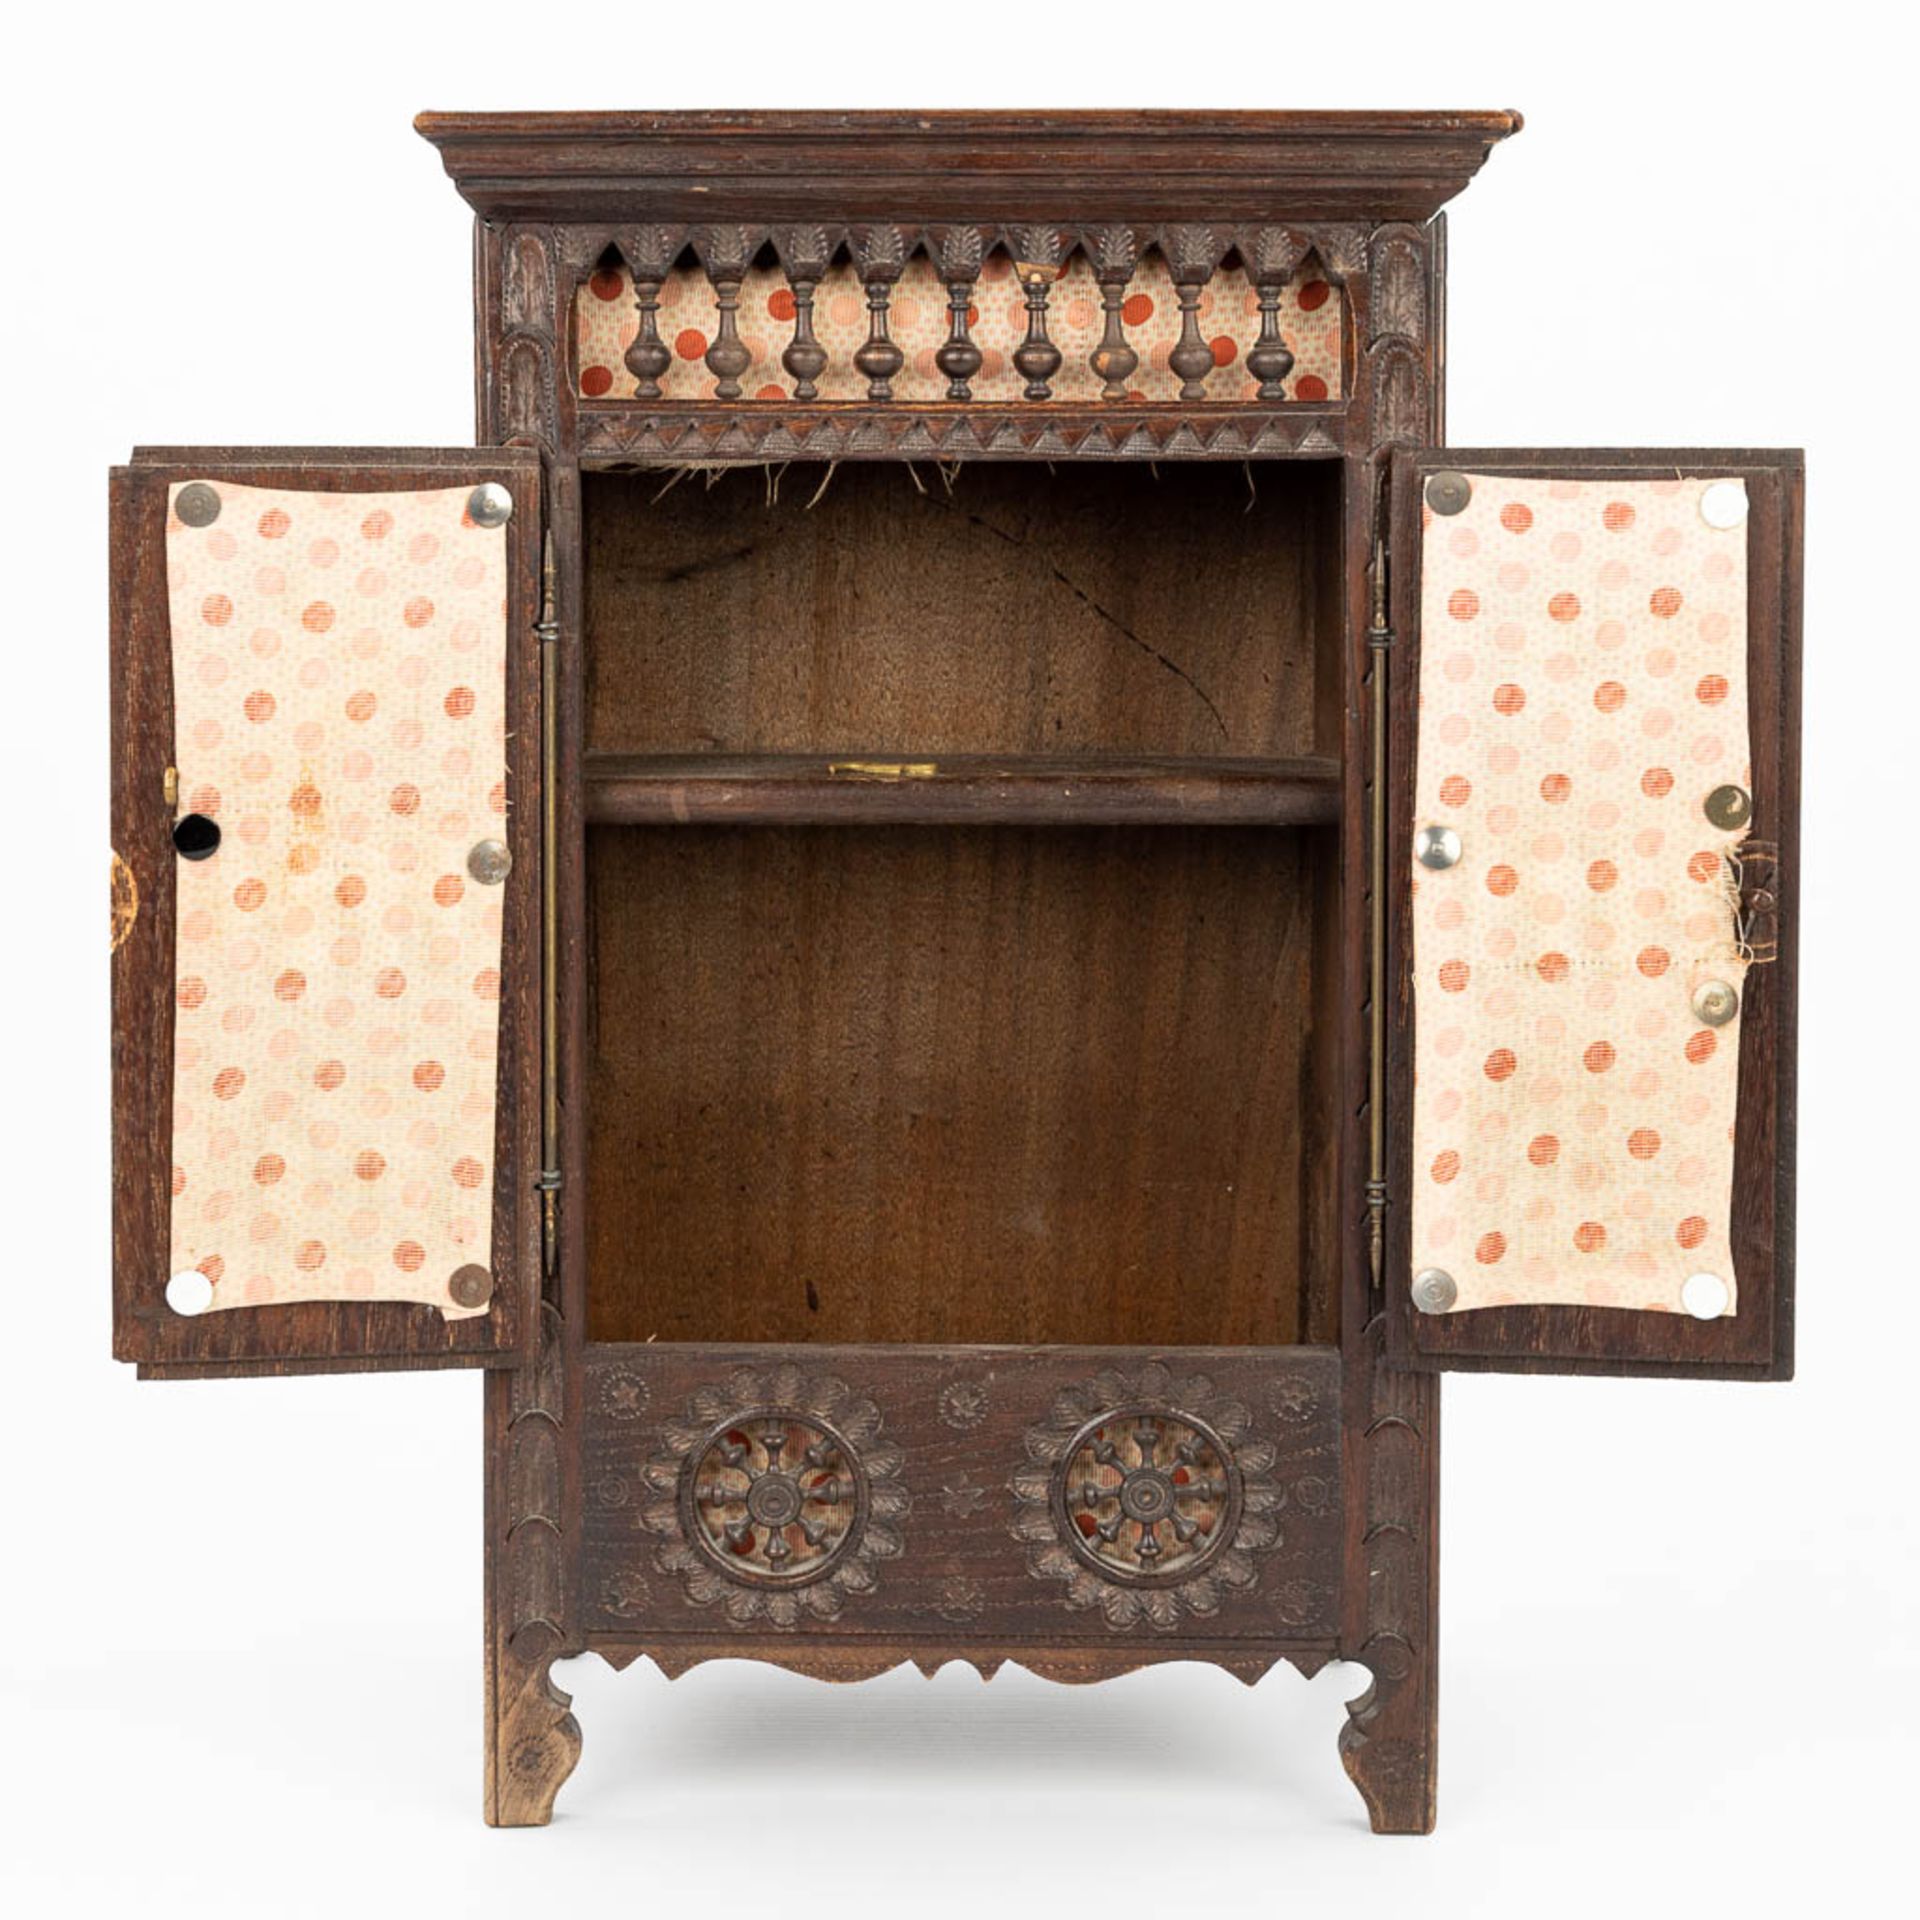 A miniature Breton cabinet, made of sculptured wood. (H:37cm) - Image 11 of 14